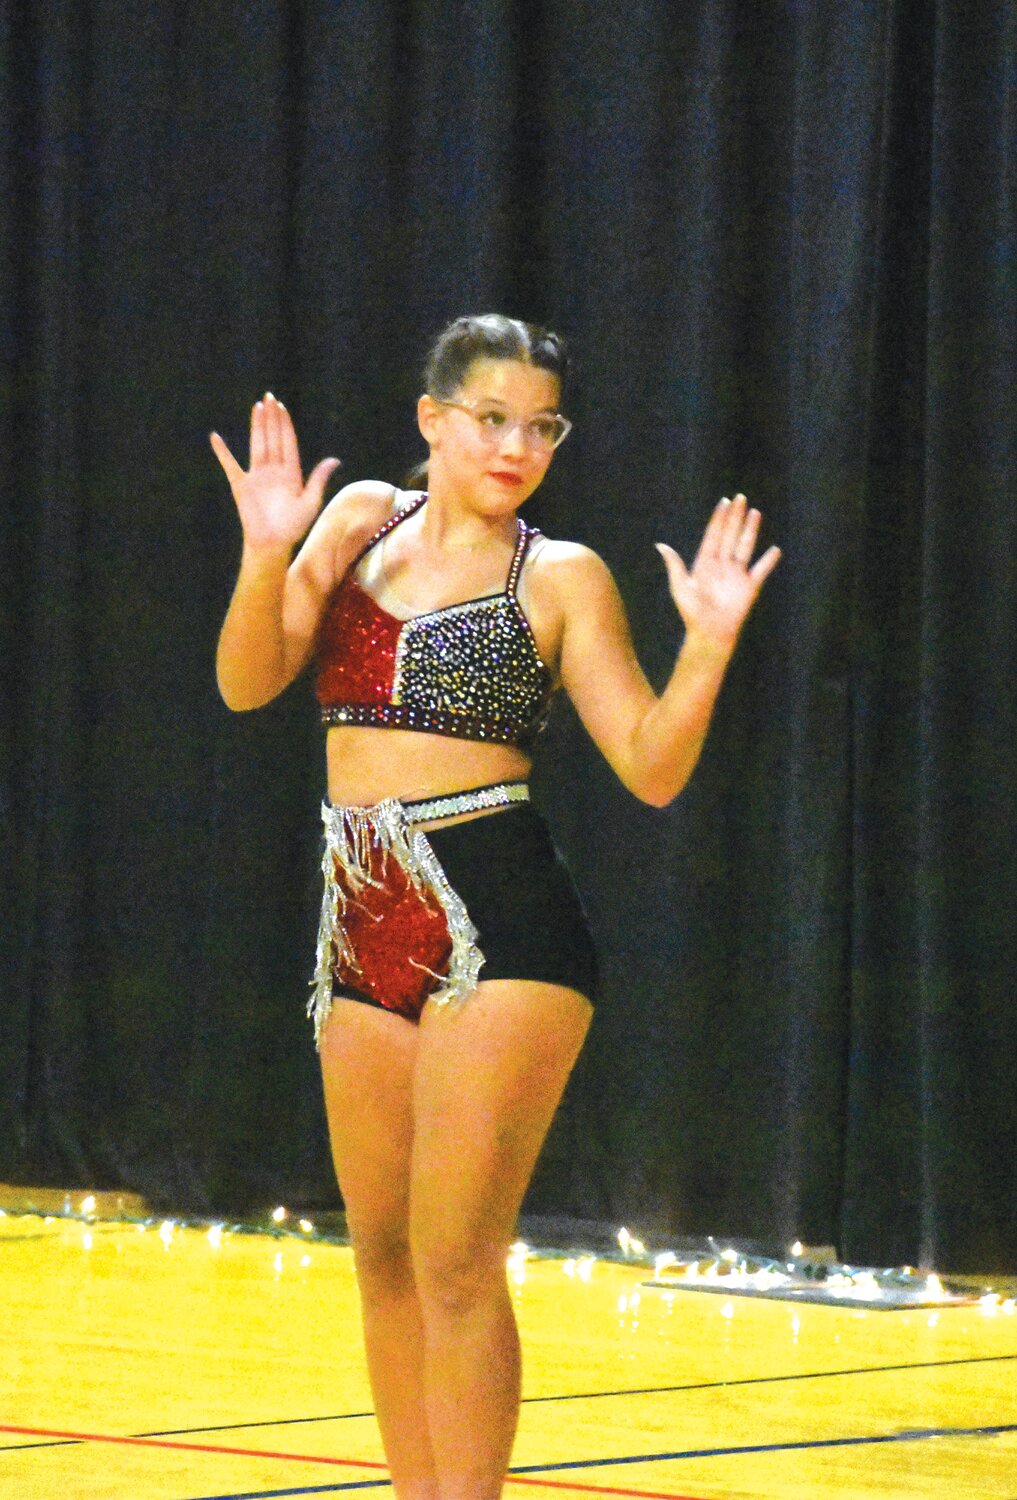 Seventh grader Jayden Strole perfroms a routine to Christina Aguilera’s “Candyman.” (Independent Newsmedia/ George Zeliff)